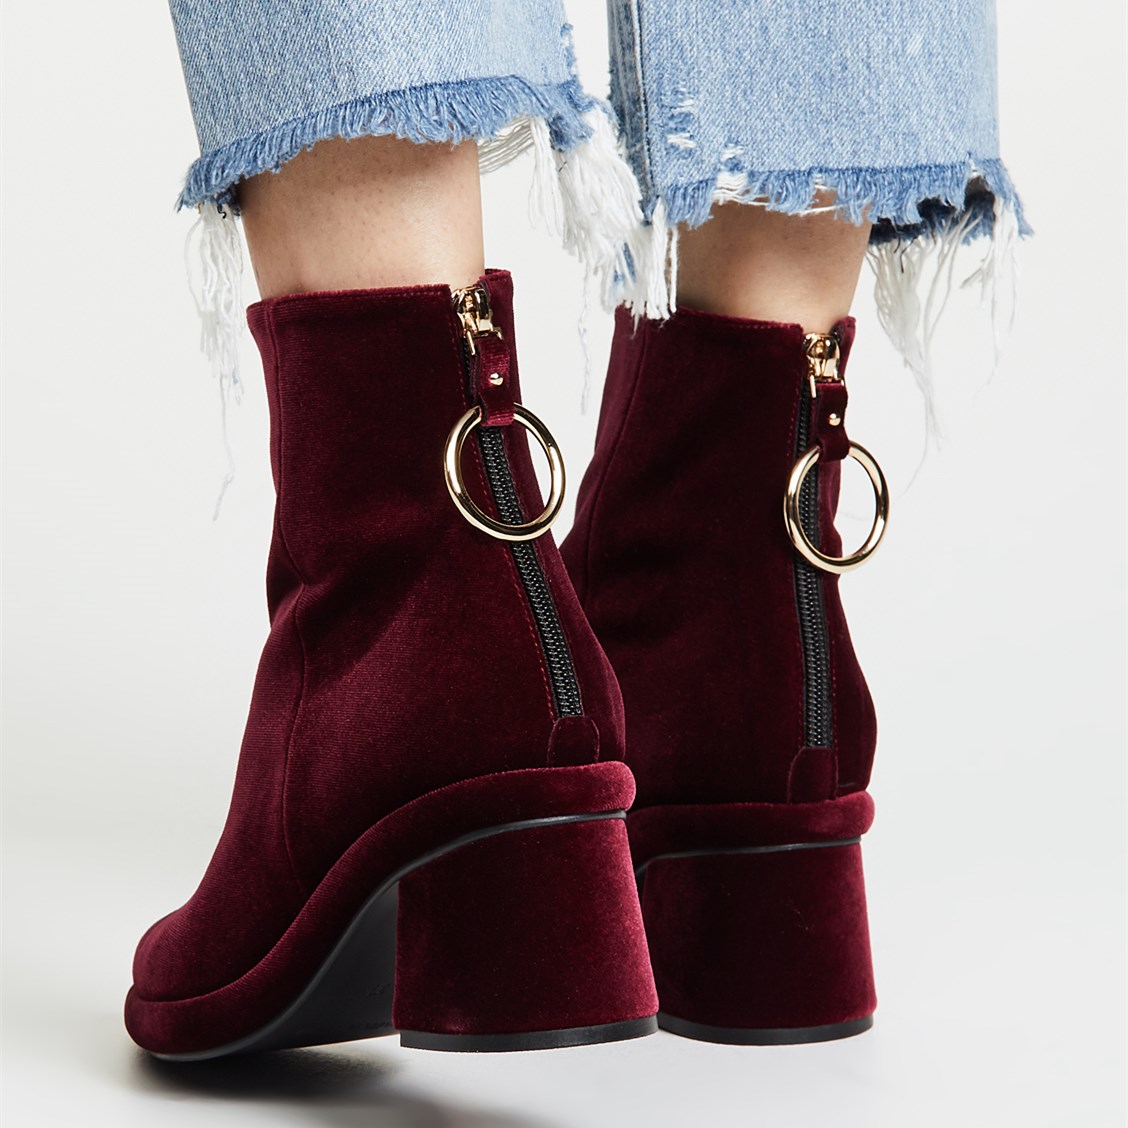 Do housework stitch seed Burgundy Velvet Boots Pointy Toe Back Zipper Block Heel Ankle Boots|FSJshoes